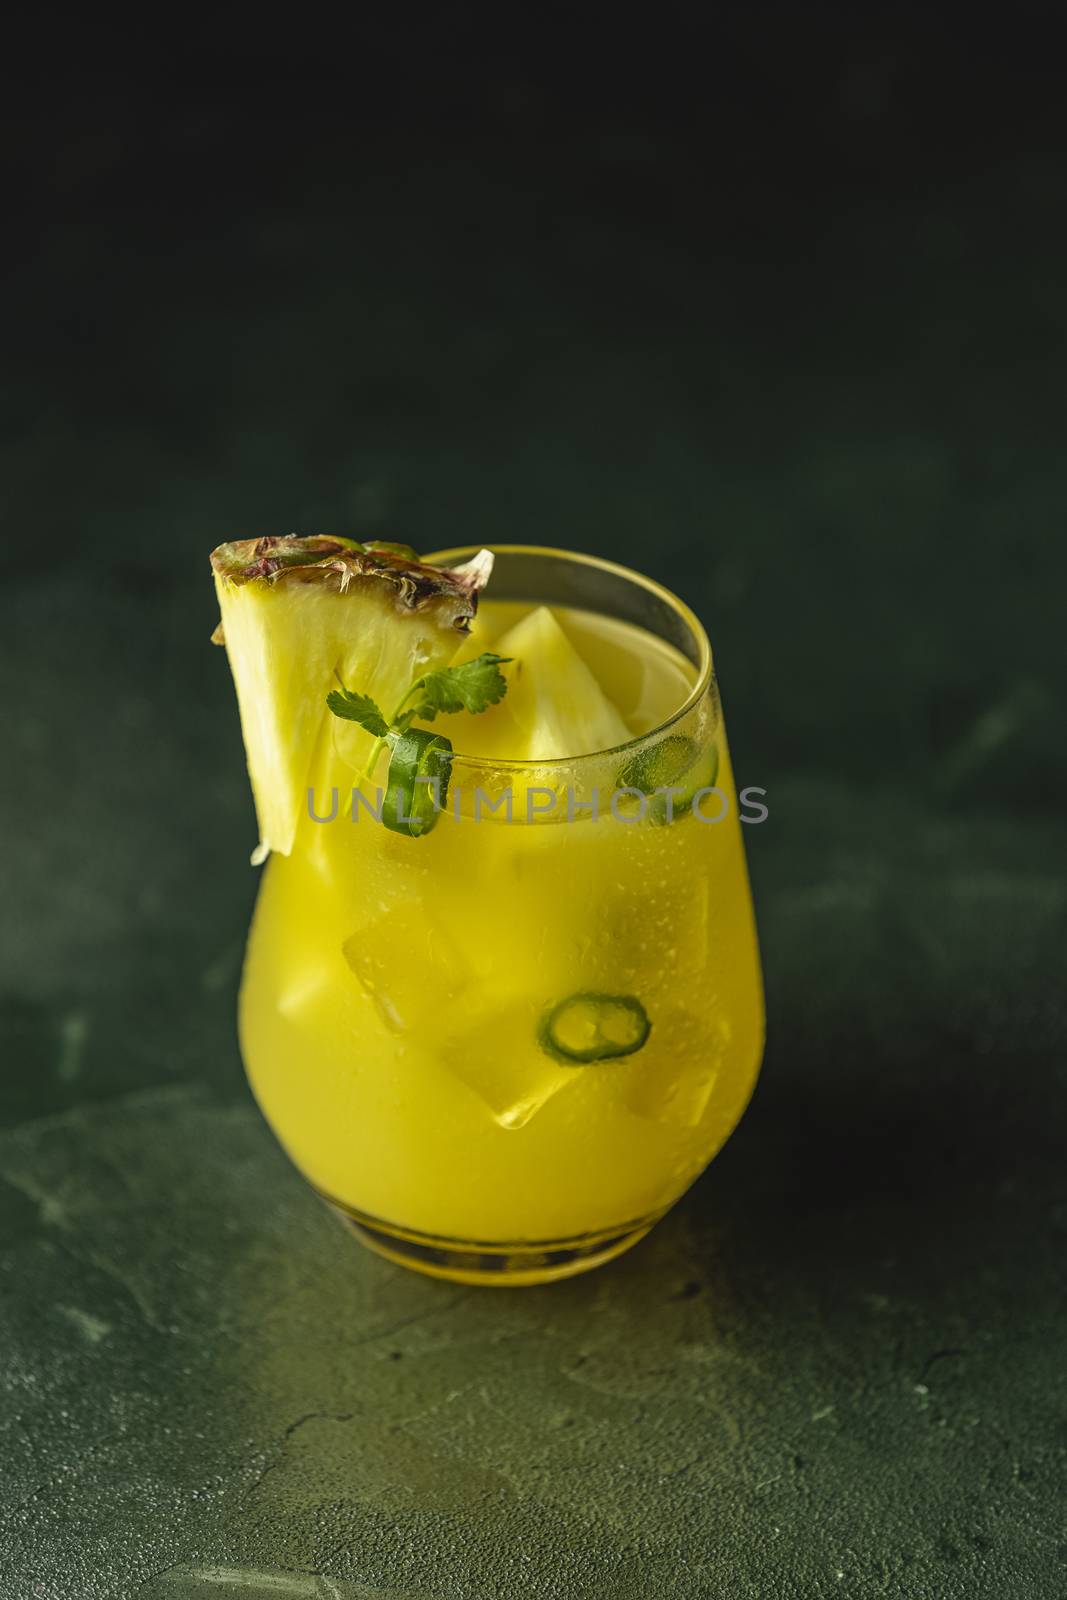 Spicy pineapple jalapeno mezcalita or margarita for Cinco de Mayo is a refreshing cocktail made with pineapple, cilantro, jalapeno and mexican distilled alcoholic beverage on dark green surface